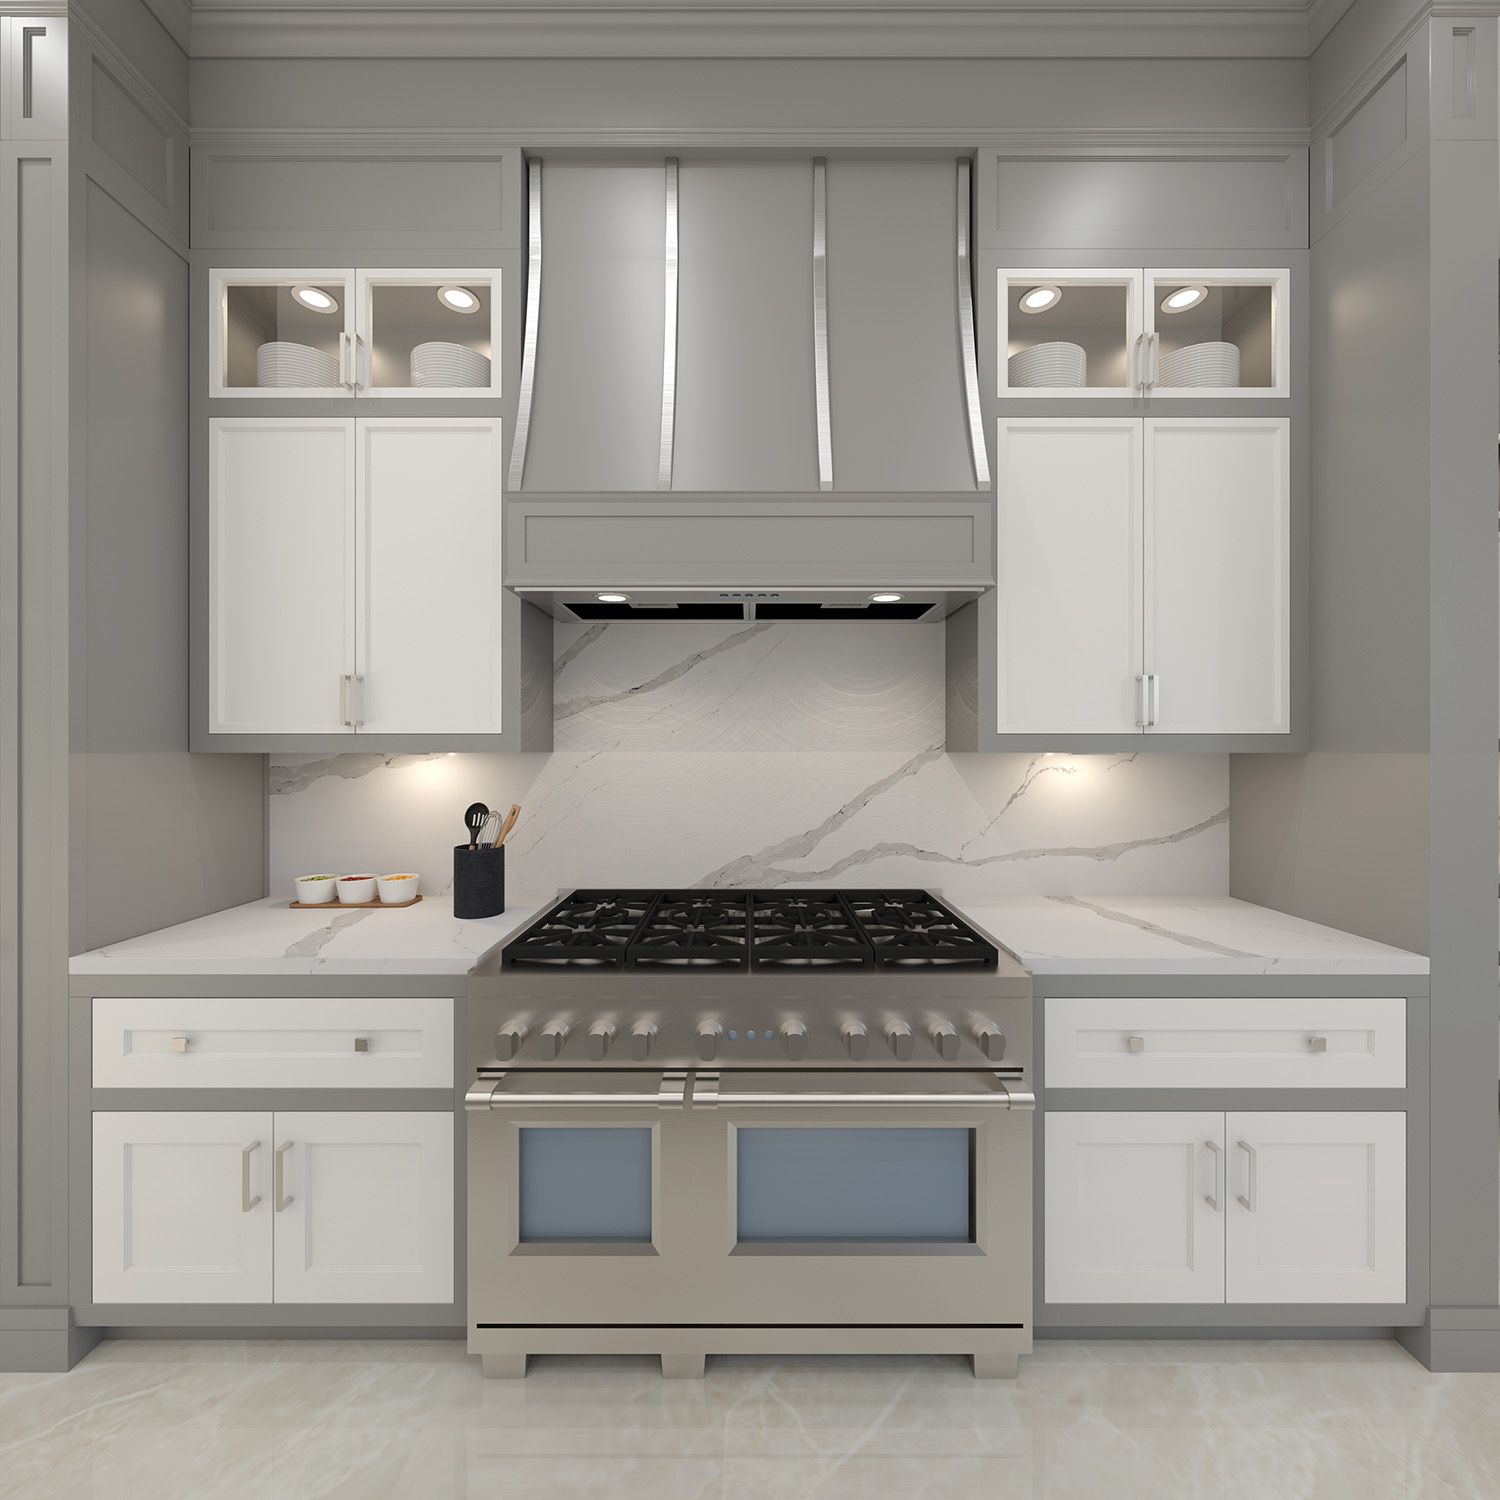 Project image: Deluxe House Kitchen in King City